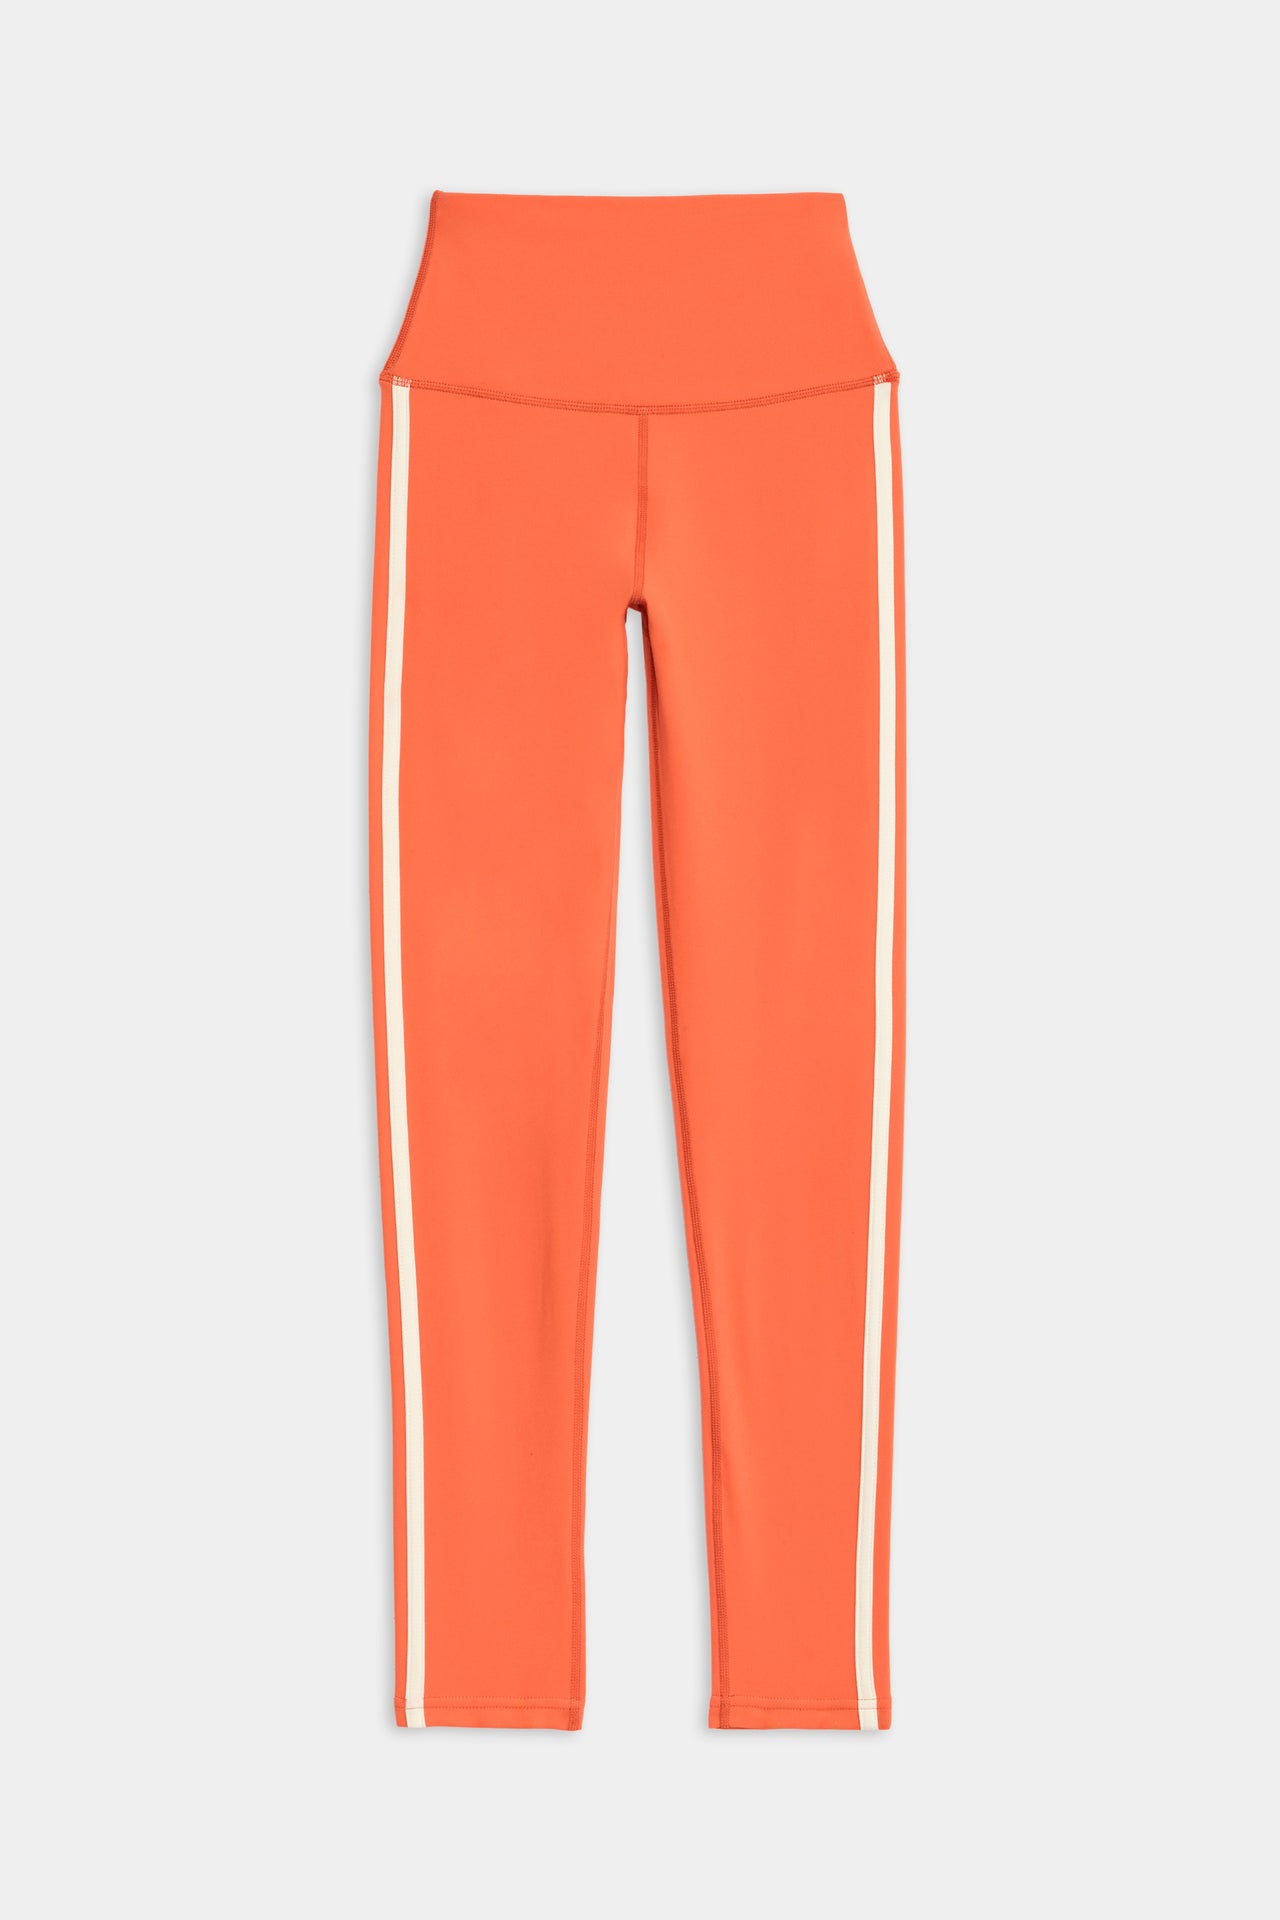 Flat view of orange leggings with two white stripes down the side